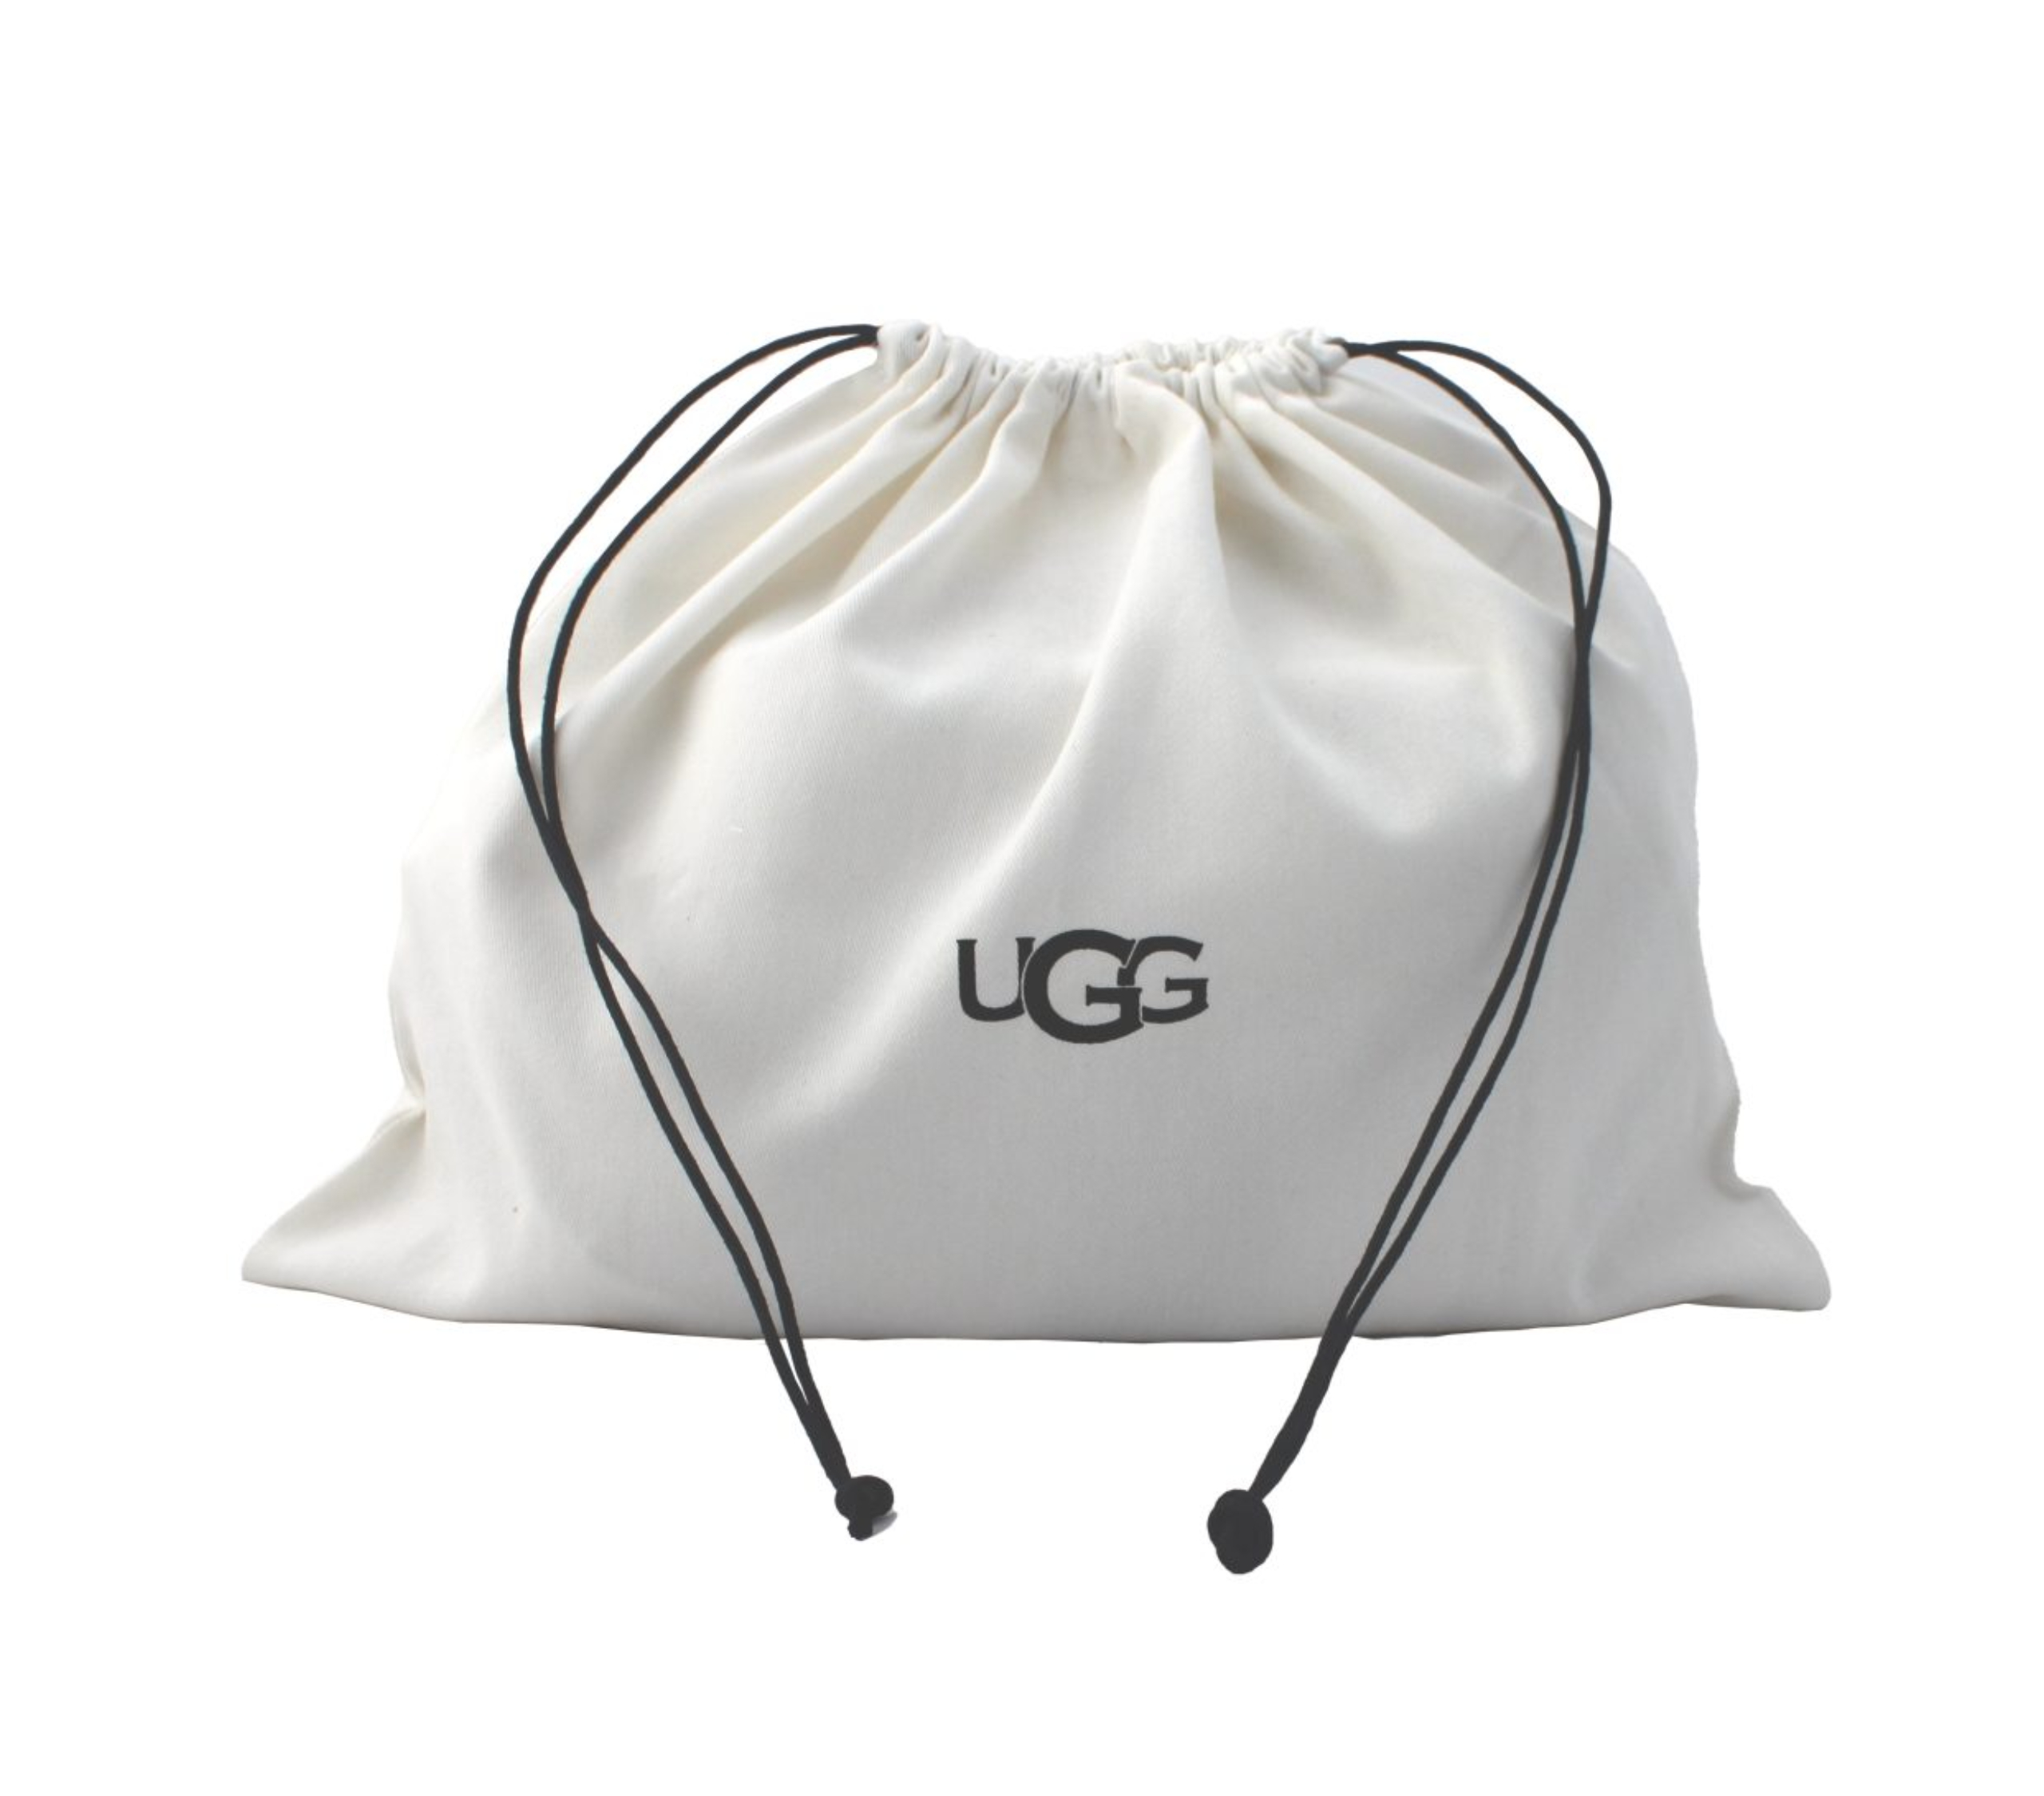 Ugg 100% BCI Cotton wide wale twill bag new